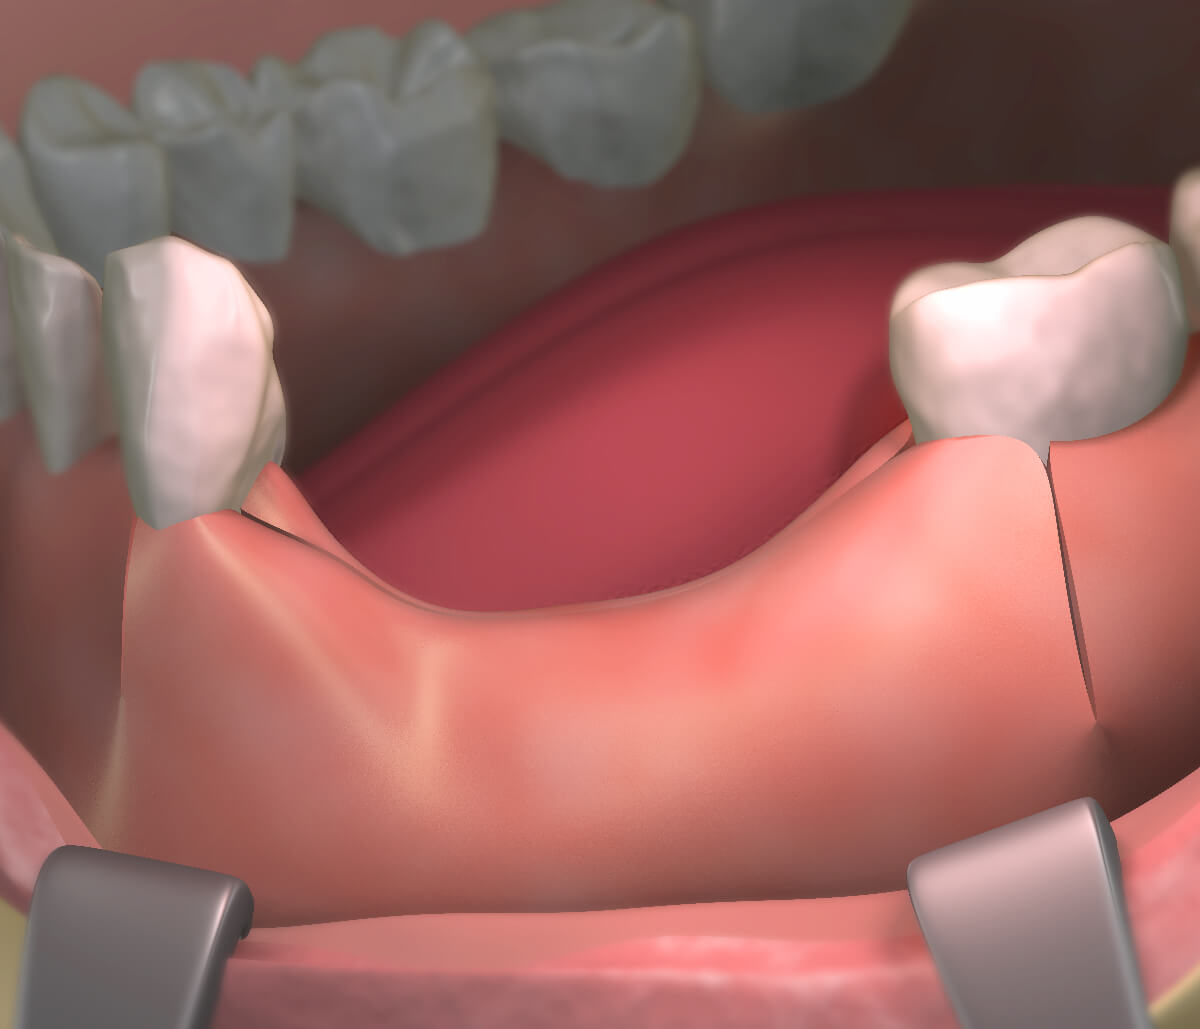 Grafting Jaw Bone for Implants in San Francisco CA area